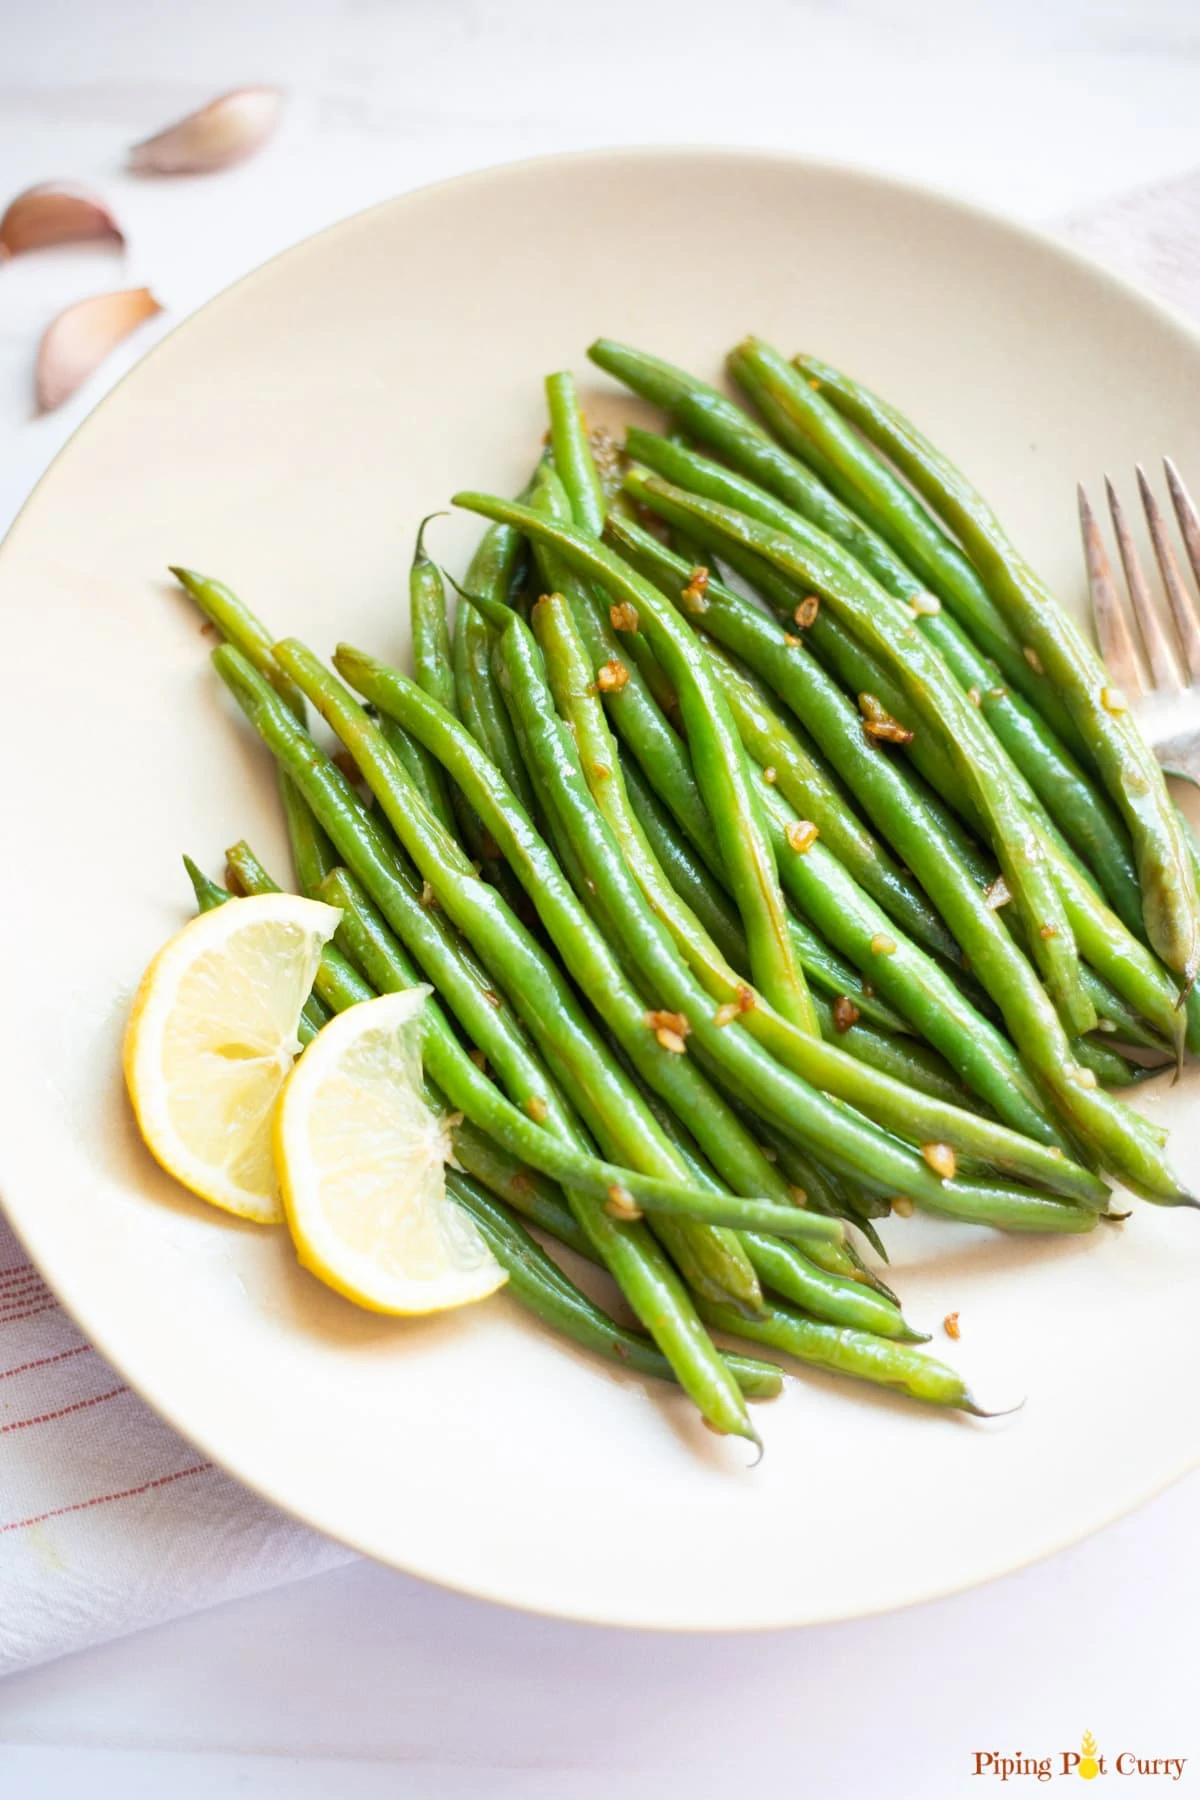 Lemon Garlic Green Beans in a plate with 2 pieces of sliced lemon